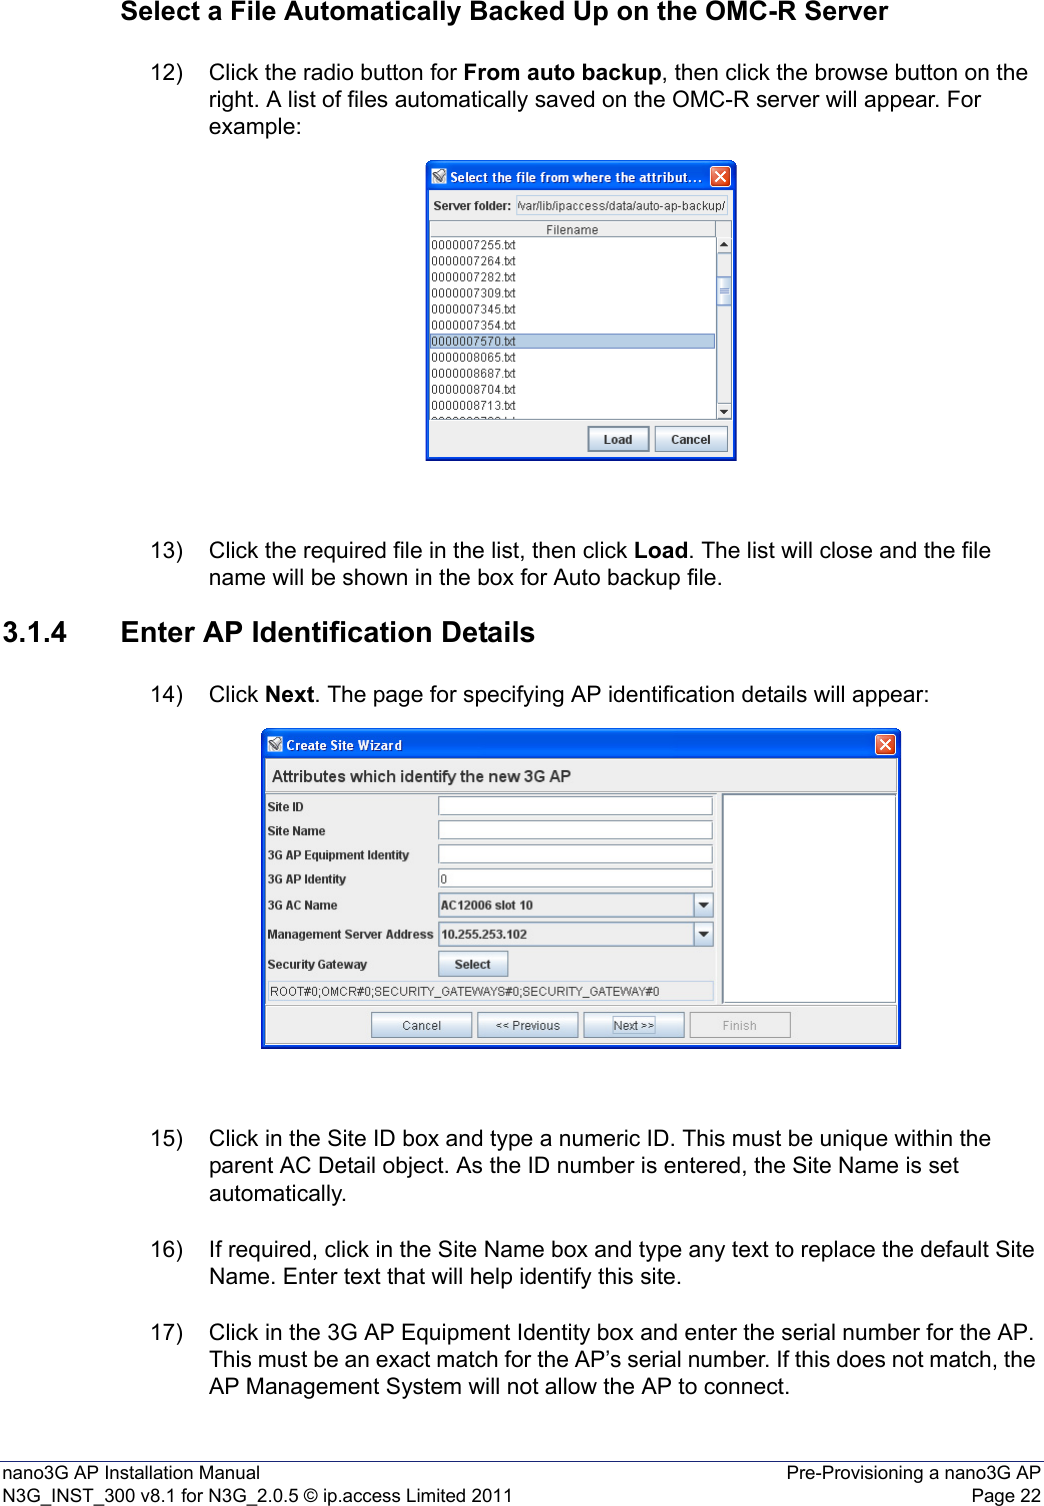 nano3G AP Installation Manual Pre-Provisioning a nano3G APN3G_INST_300 v8.1 for N3G_2.0.5 © ip.access Limited 2011 Page 22Select a File Automatically Backed Up on the OMC-R Server12) Click the radio button for From auto backup, then click the browse button on the right. A list of files automatically saved on the OMC-R server will appear. For example:13) Click the required file in the list, then click Load. The list will close and the file name will be shown in the box for Auto backup file. 3.1.4 Enter AP Identification Details14) Click Next. The page for specifying AP identification details will appear:15) Click in the Site ID box and type a numeric ID. This must be unique within the parent AC Detail object. As the ID number is entered, the Site Name is set automatically. 16) If required, click in the Site Name box and type any text to replace the default Site Name. Enter text that will help identify this site. 17) Click in the 3G AP Equipment Identity box and enter the serial number for the AP. This must be an exact match for the AP’s serial number. If this does not match, the AP Management System will not allow the AP to connect. 